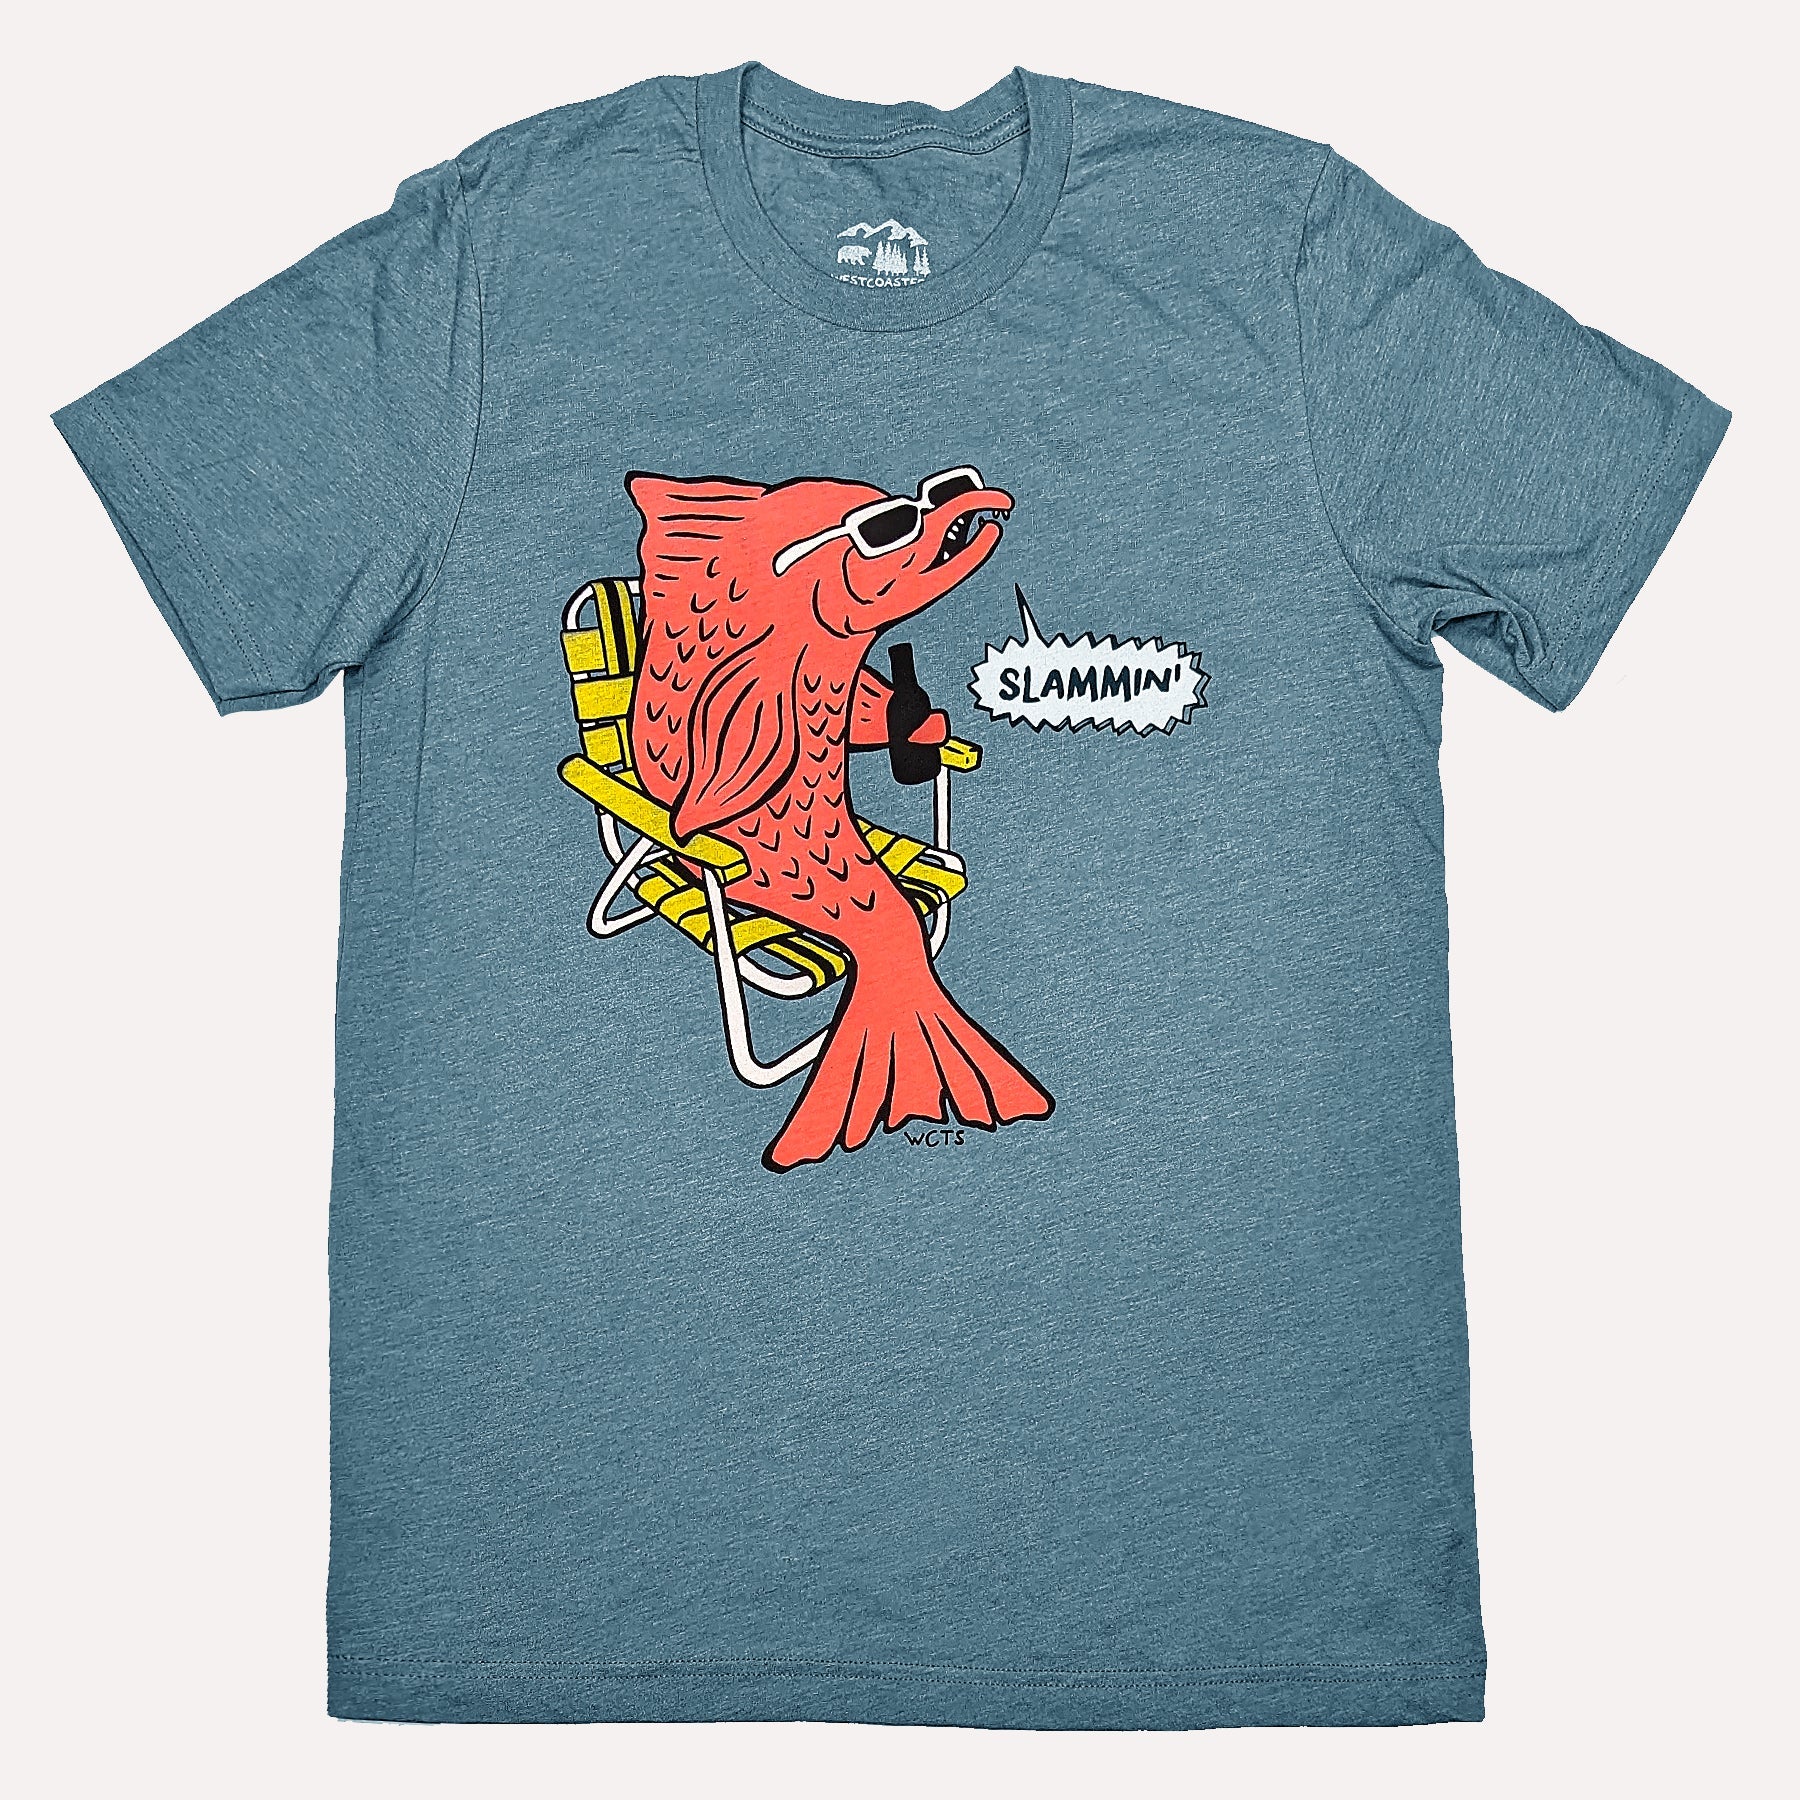 Westcoastees T-Shirt Ella The Salmon - Westcoastees T-Shirt Ella The Salmon -  - House of Himwitsa Native Art Gallery and Gifts